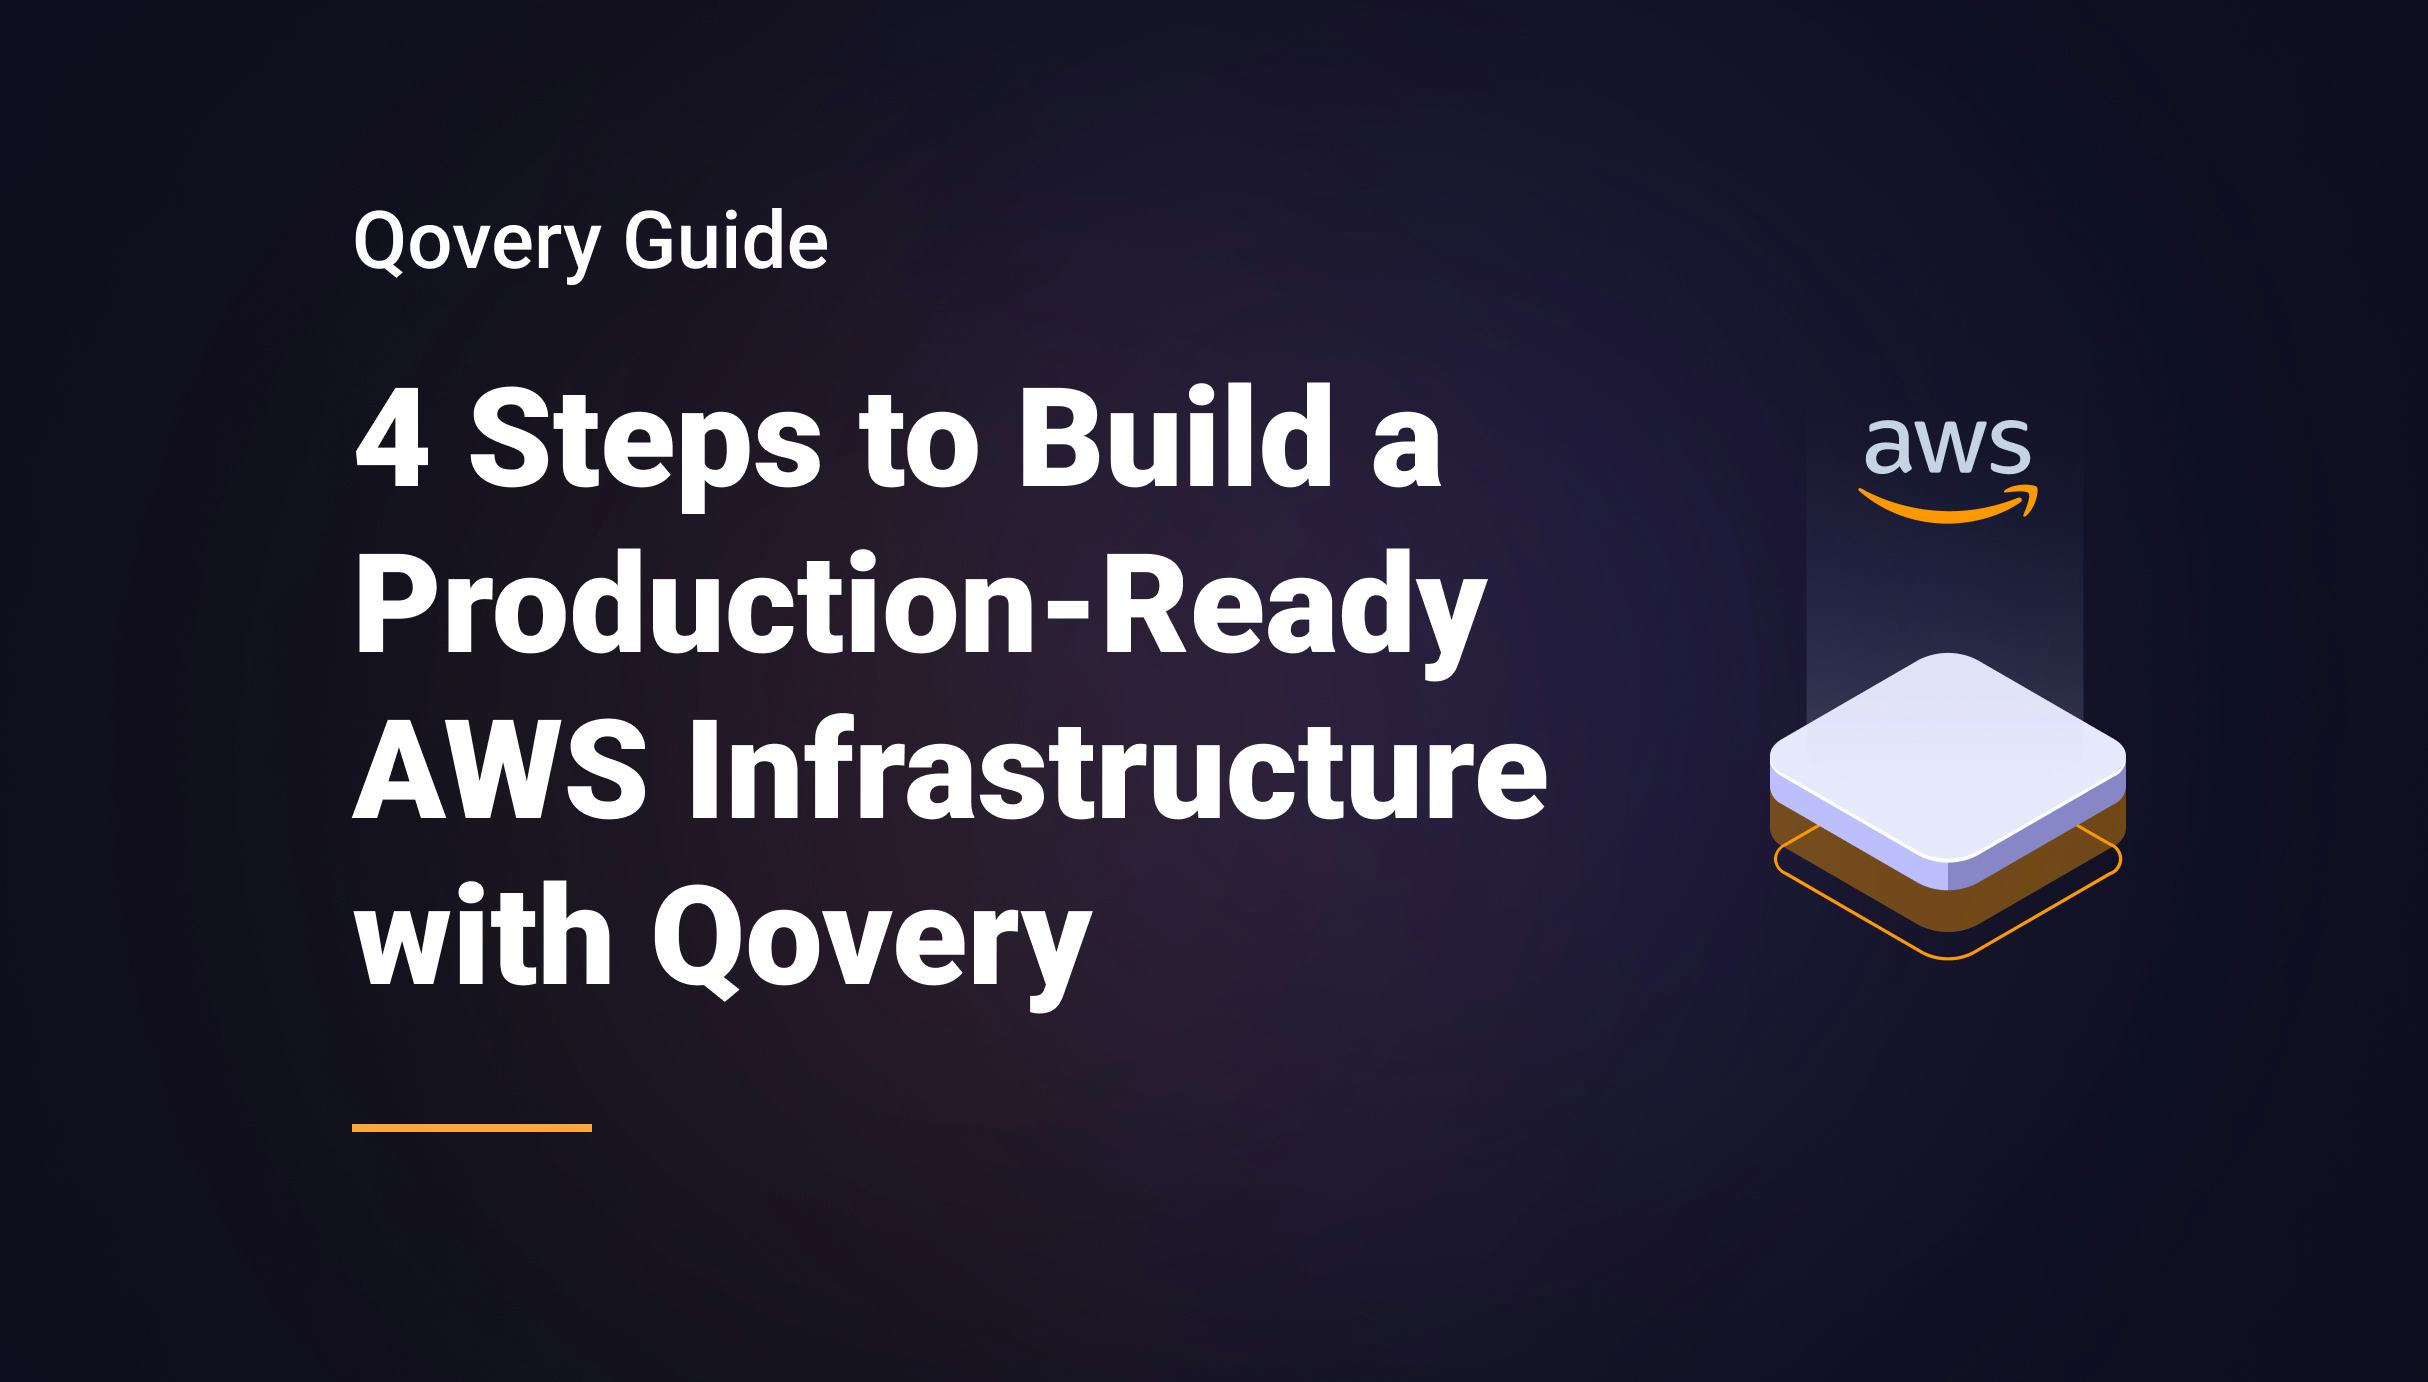 How to Build a Production-Ready AWS Infrastructure in 4 Simple Steps with Qovery - Qovery